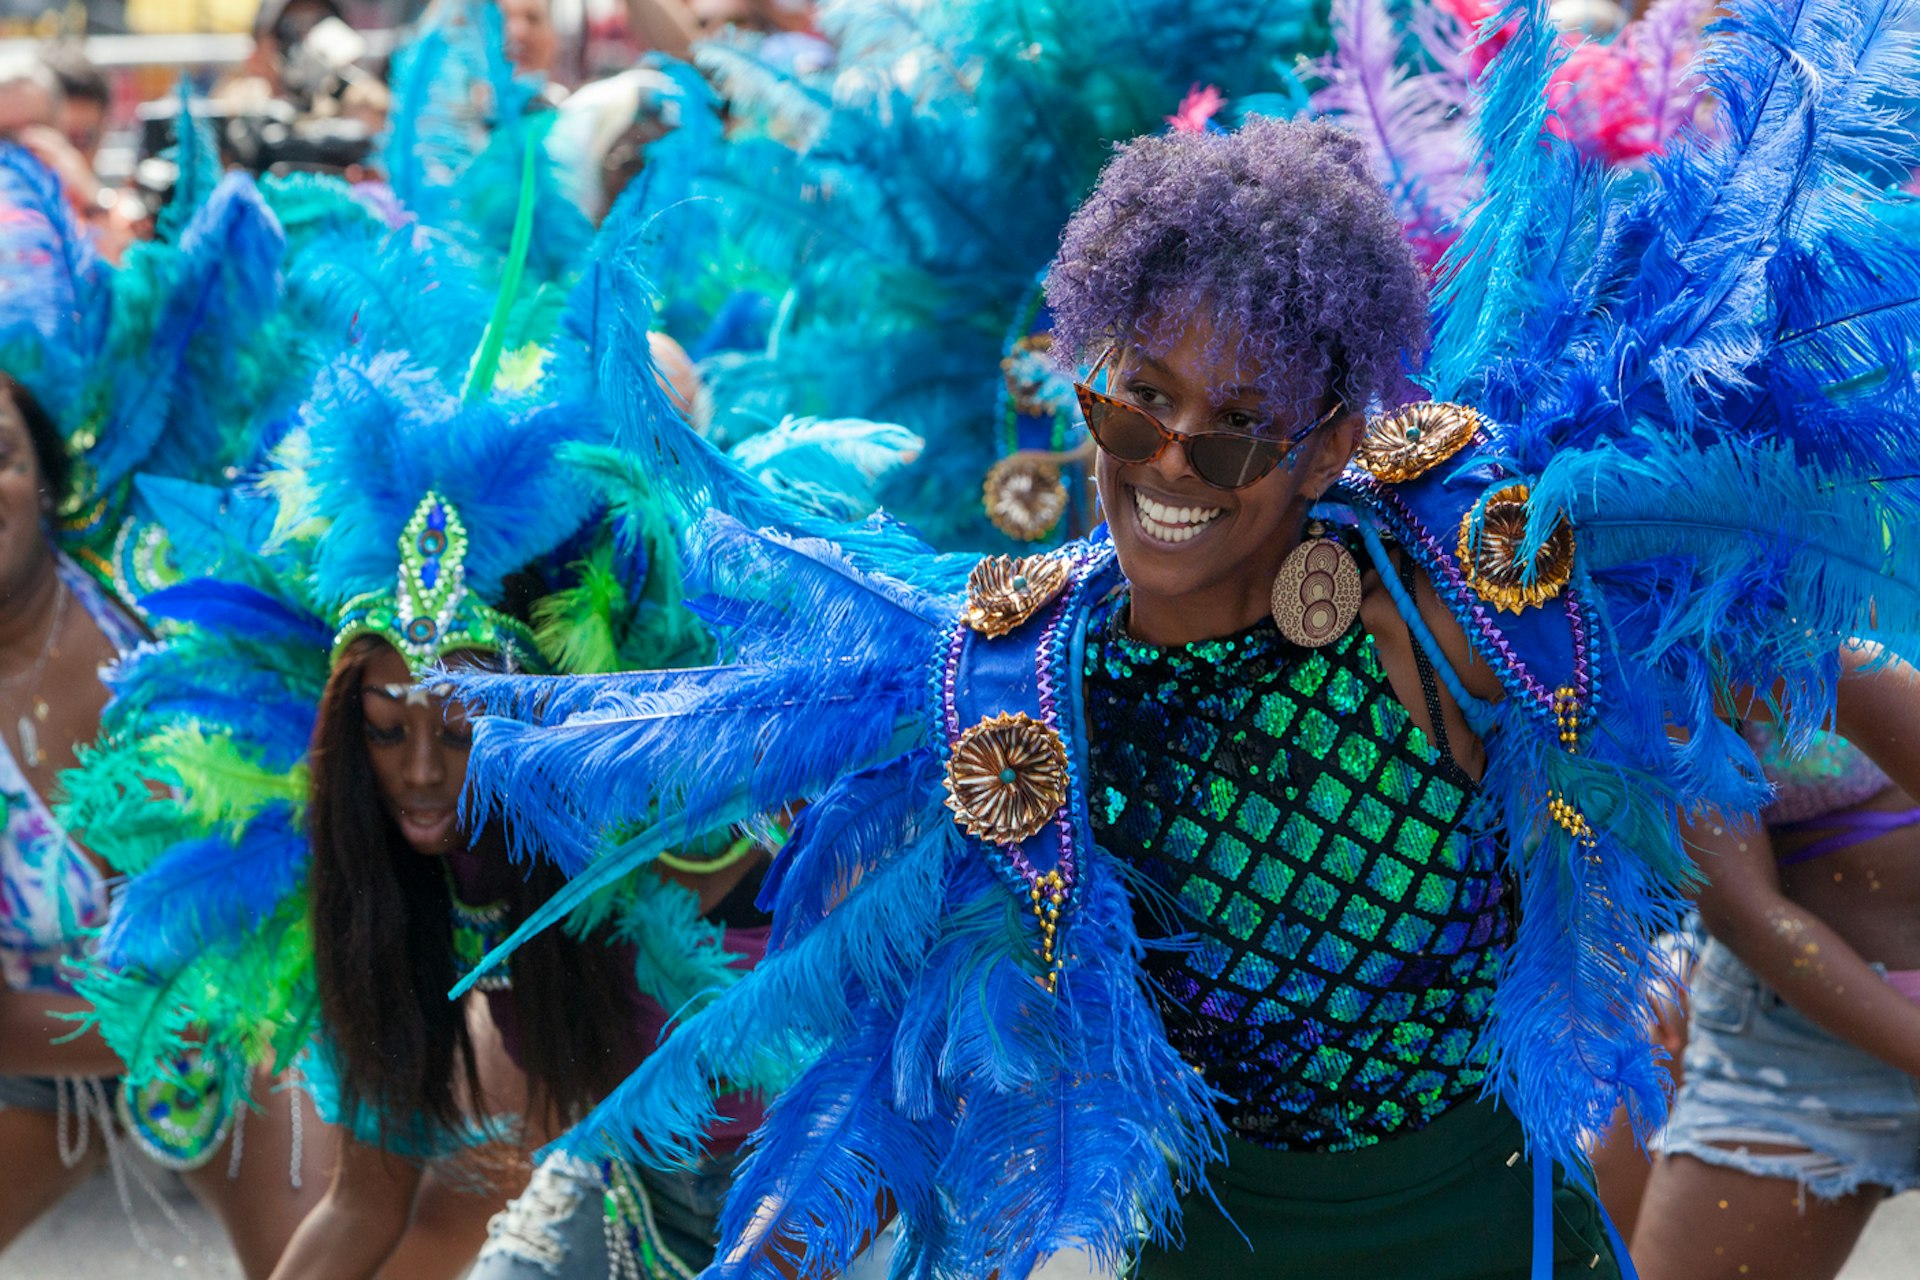 Notting hill Carnival kids day dancers and revellers a celebration of Black London